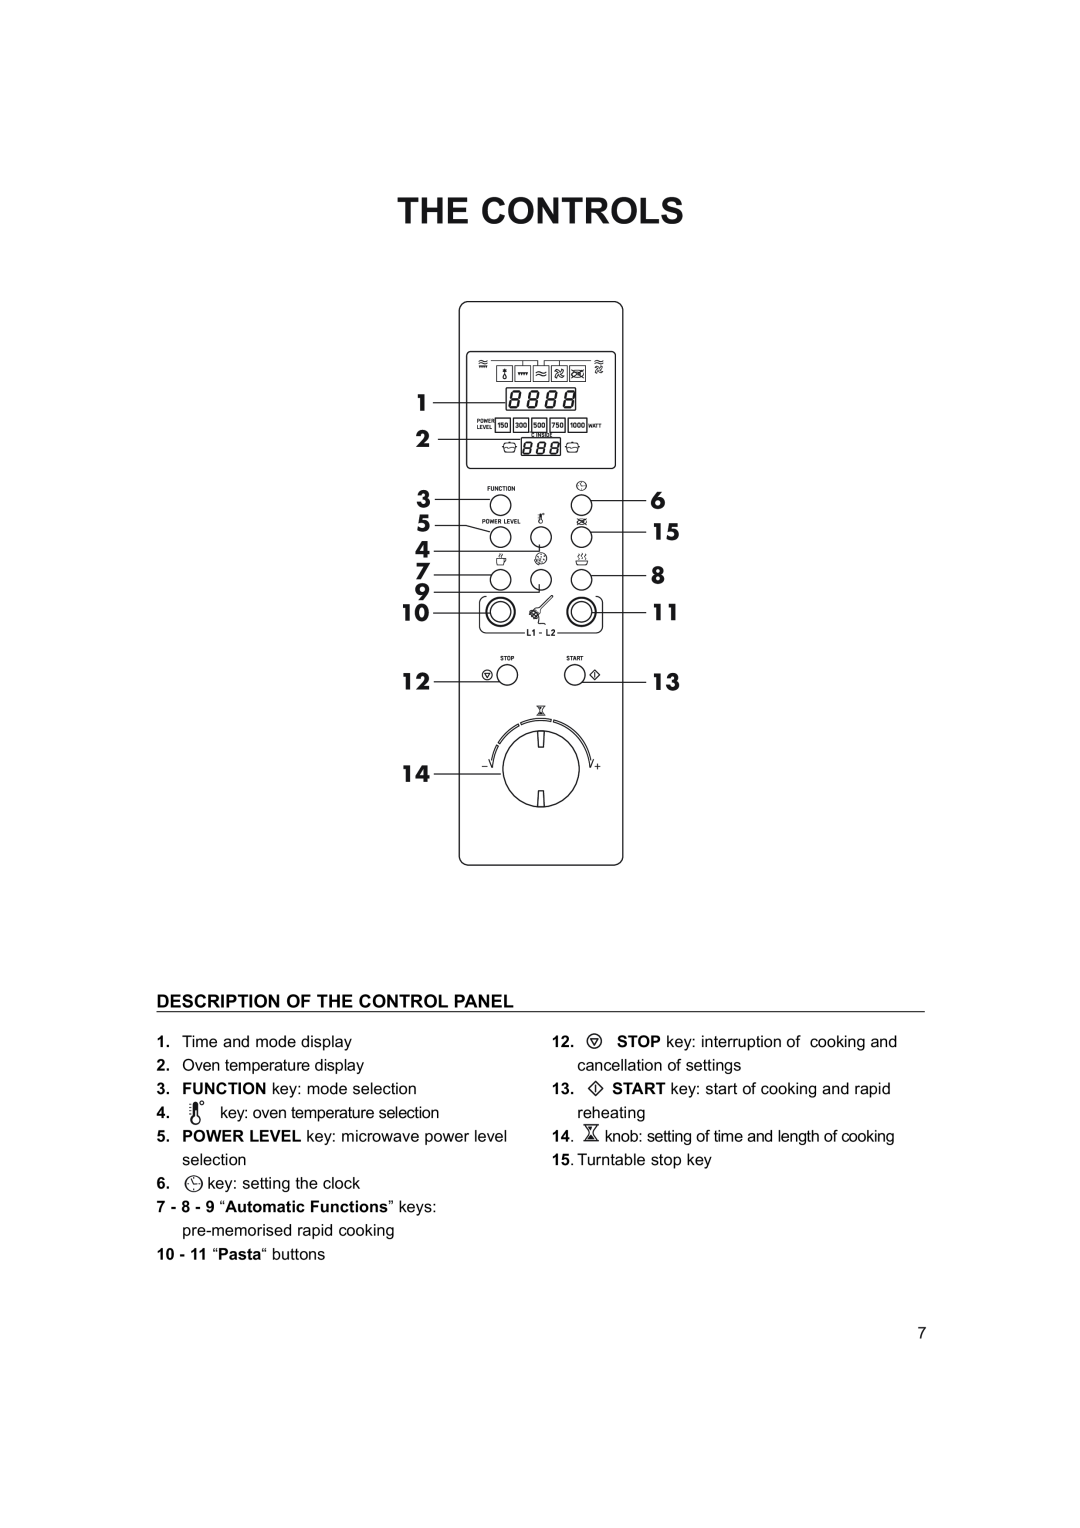 Hotpoint 6685X The Controls, Description Of The Control Panel, Time and mode display, STOP key interruption of cooking and 